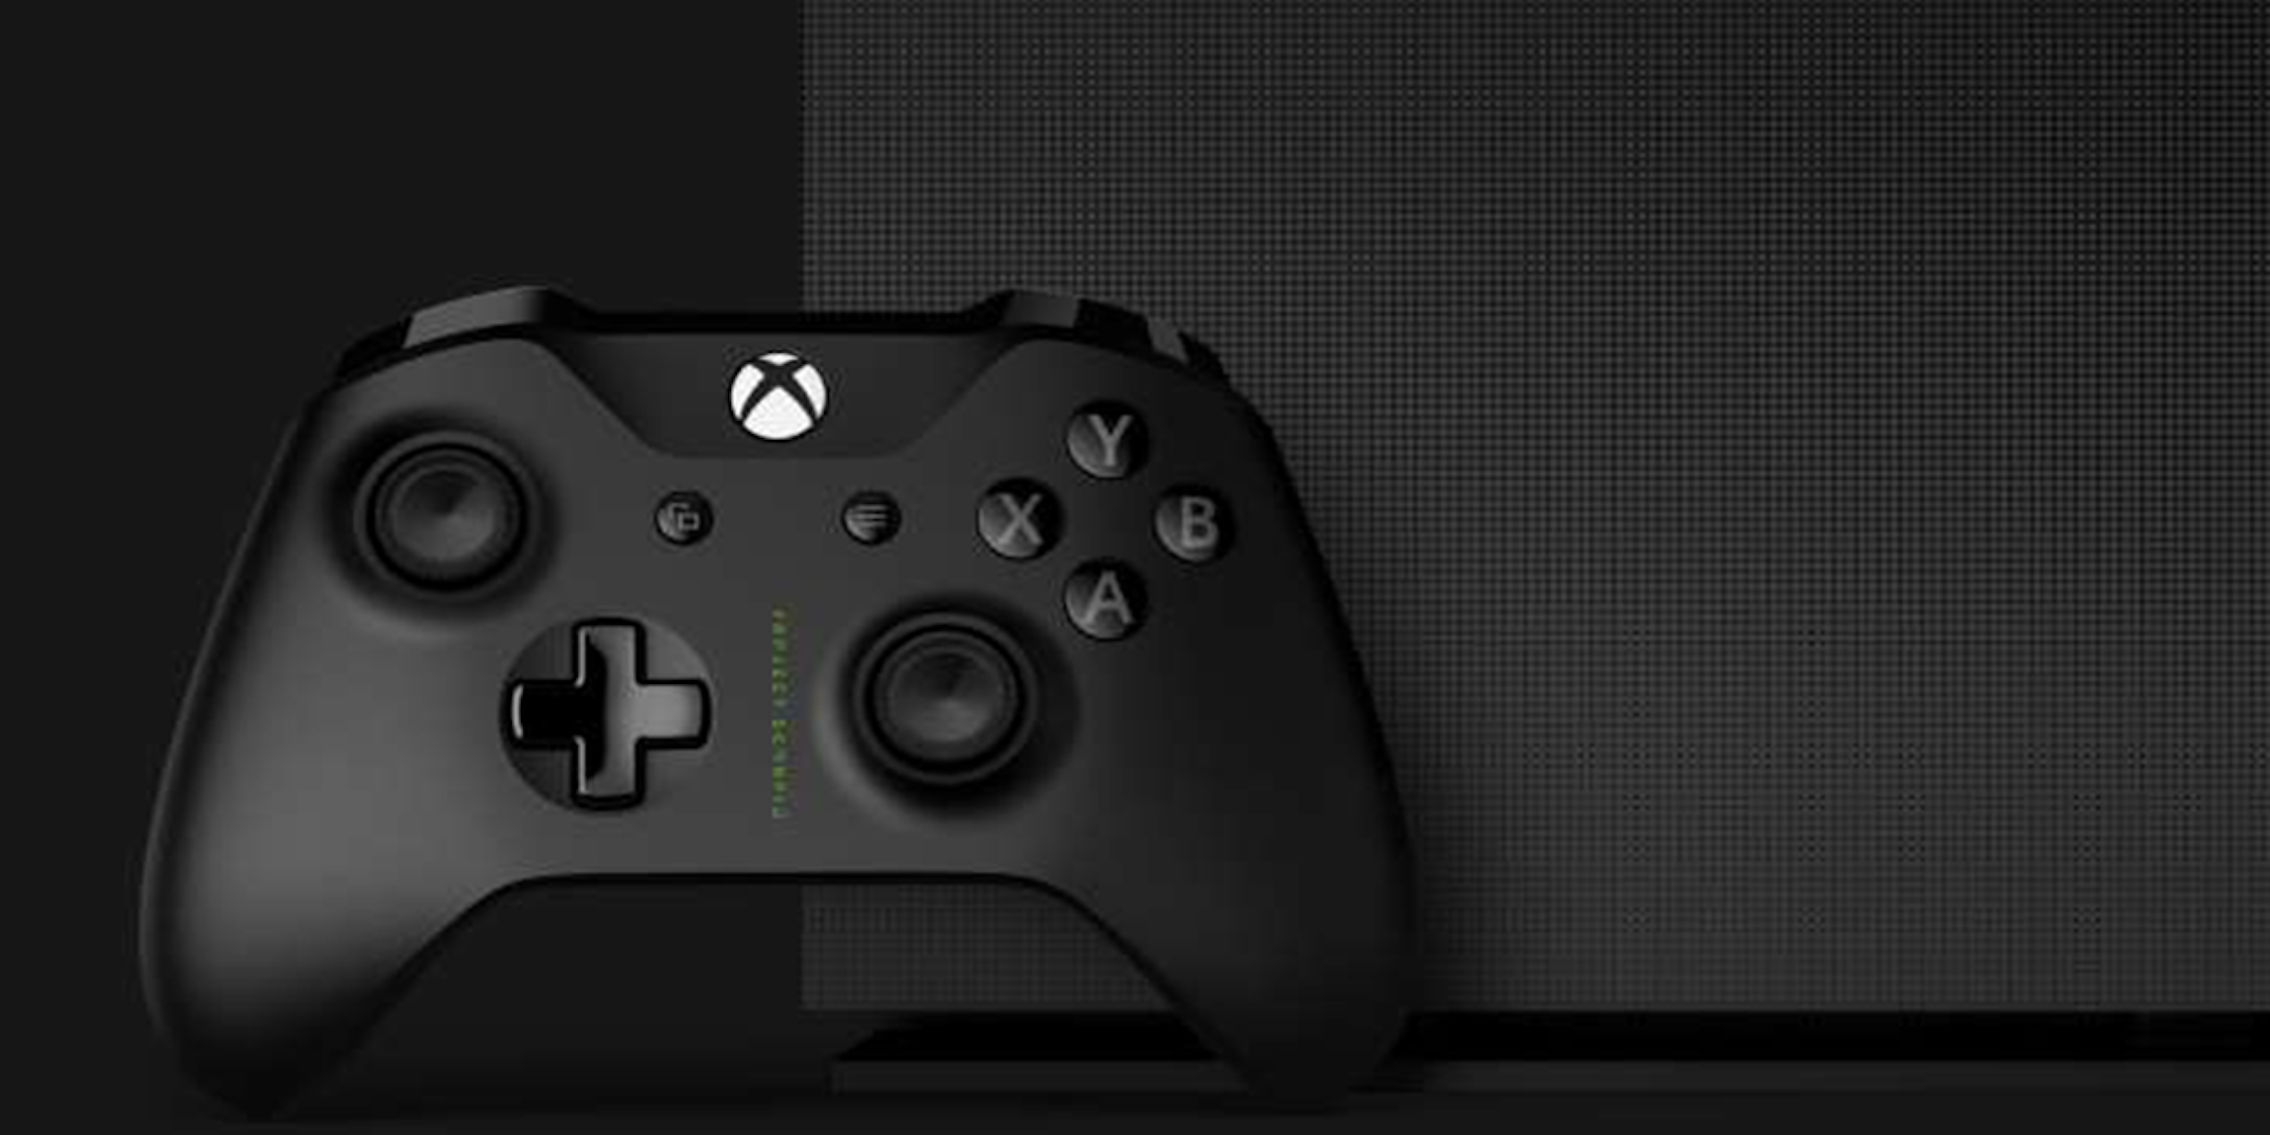 Xbox One X Project Scorpio Edition Back in Stock at GameStop